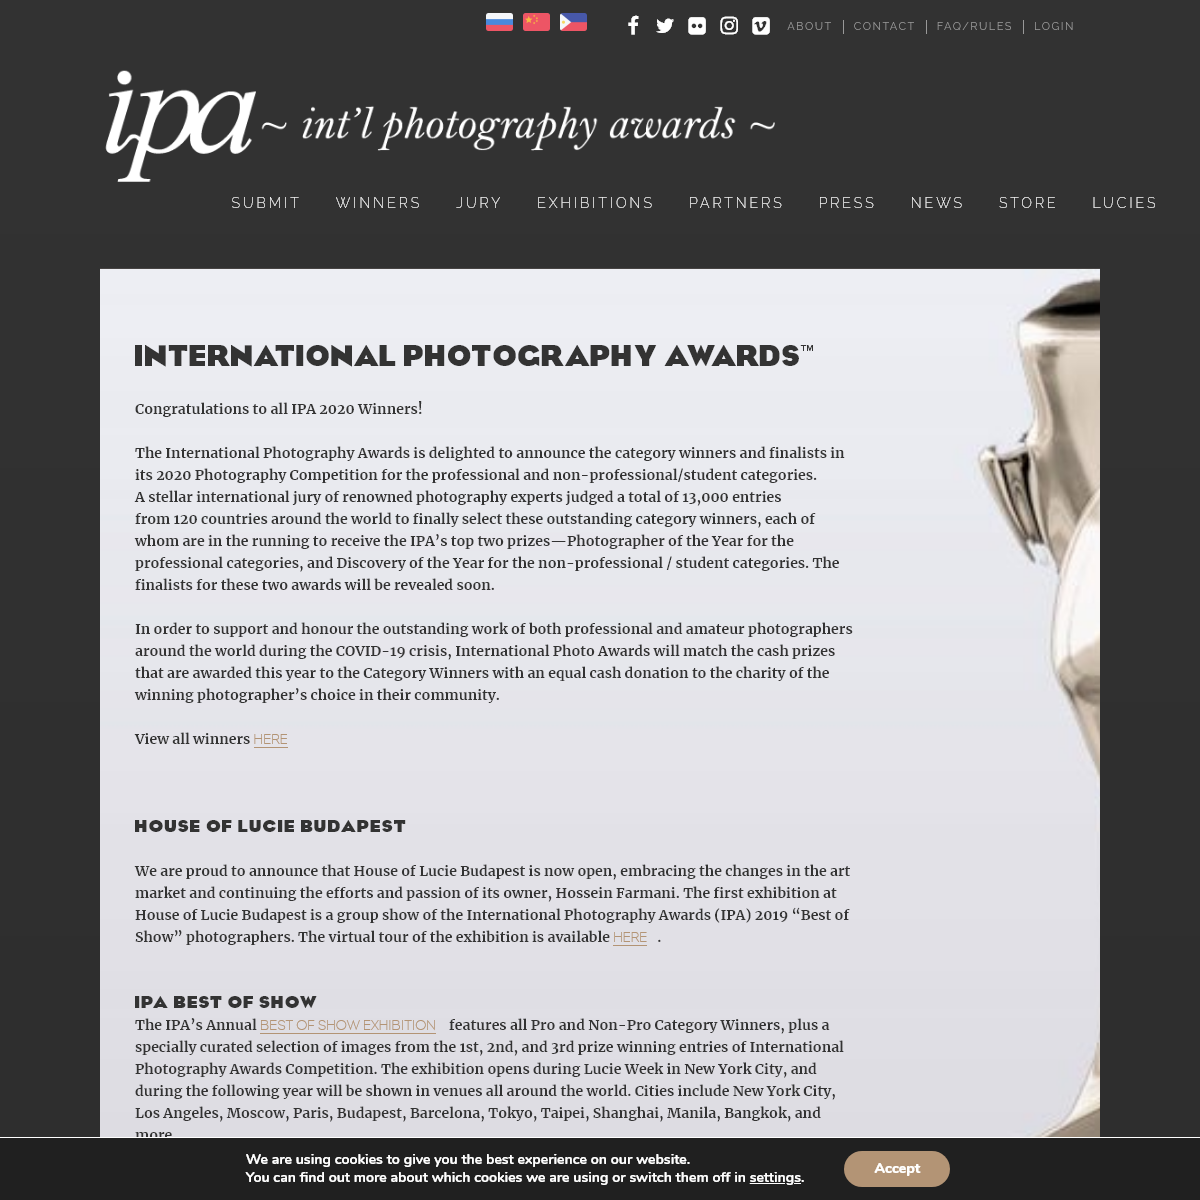 A complete backup of photoawards.com